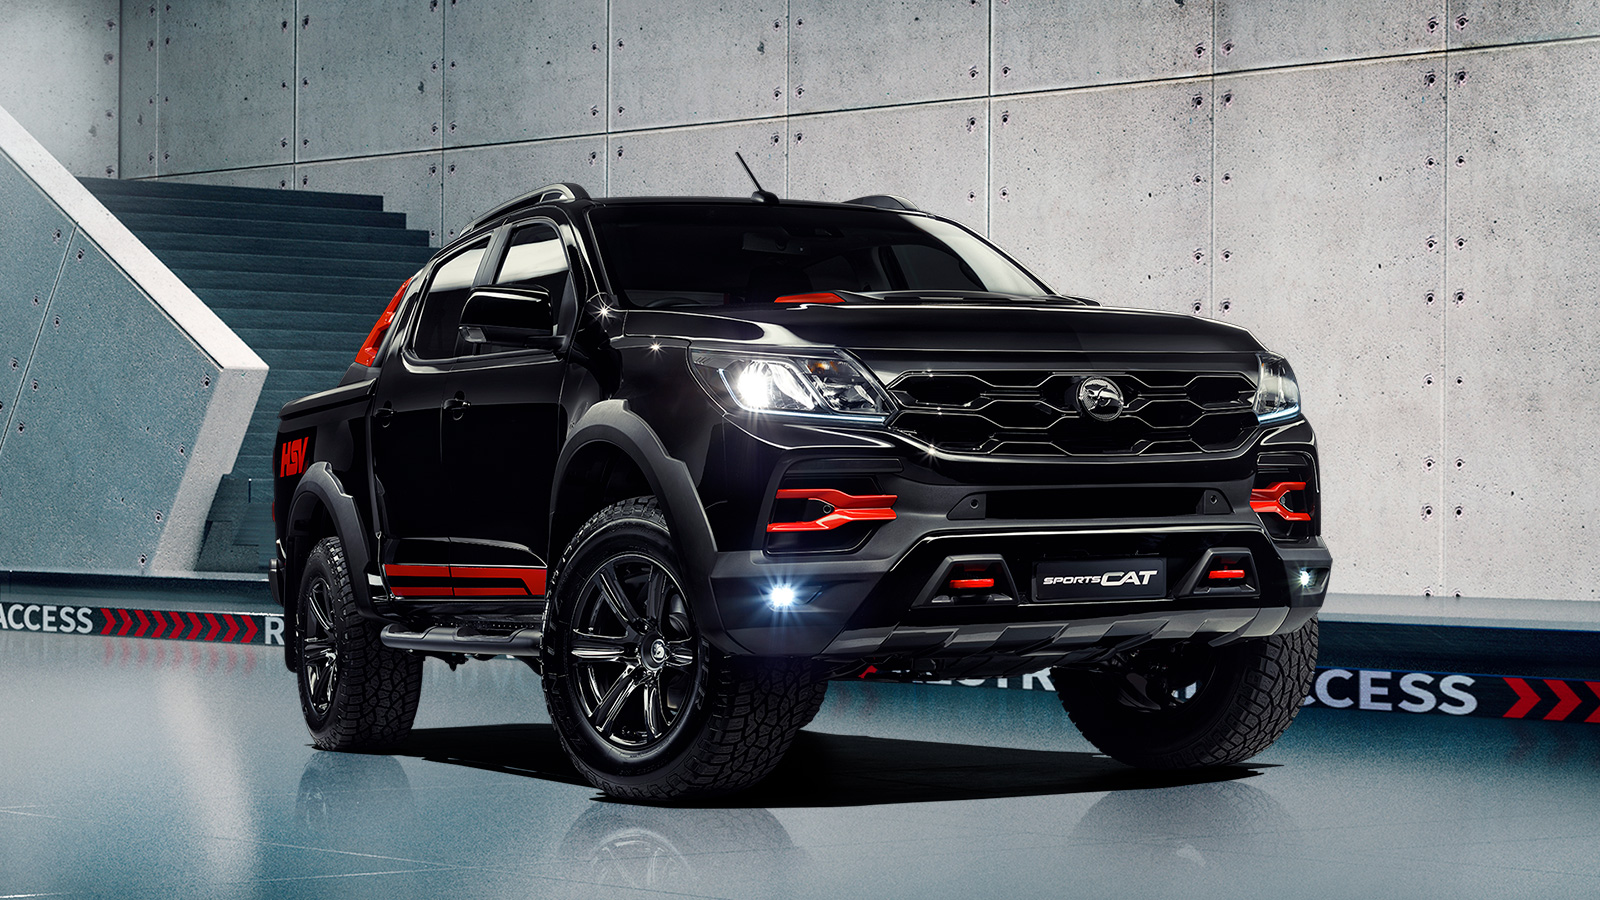 HSV Releases Limited Edition Colorado SportsCat